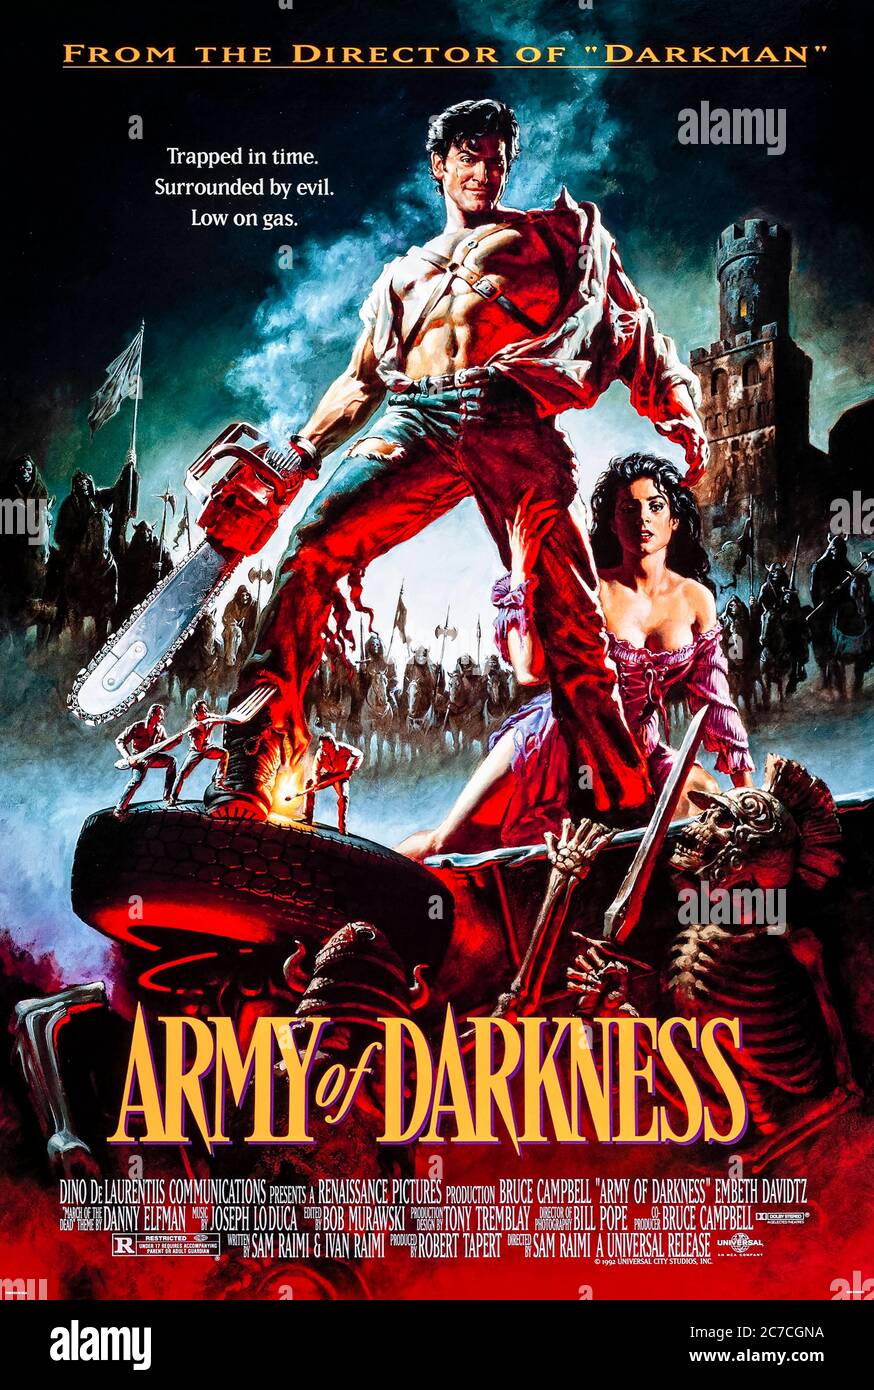 Army of Darkness (1992) directed by Sam Raimi and starring Bruce Campbell, Embeth Davidtz, Marcus Gilbert and Ian Abercrombie. Ash is back, way back to 1300AD where as the Chosen One he must retrieve the Necronomicon to return home. Stock Photo